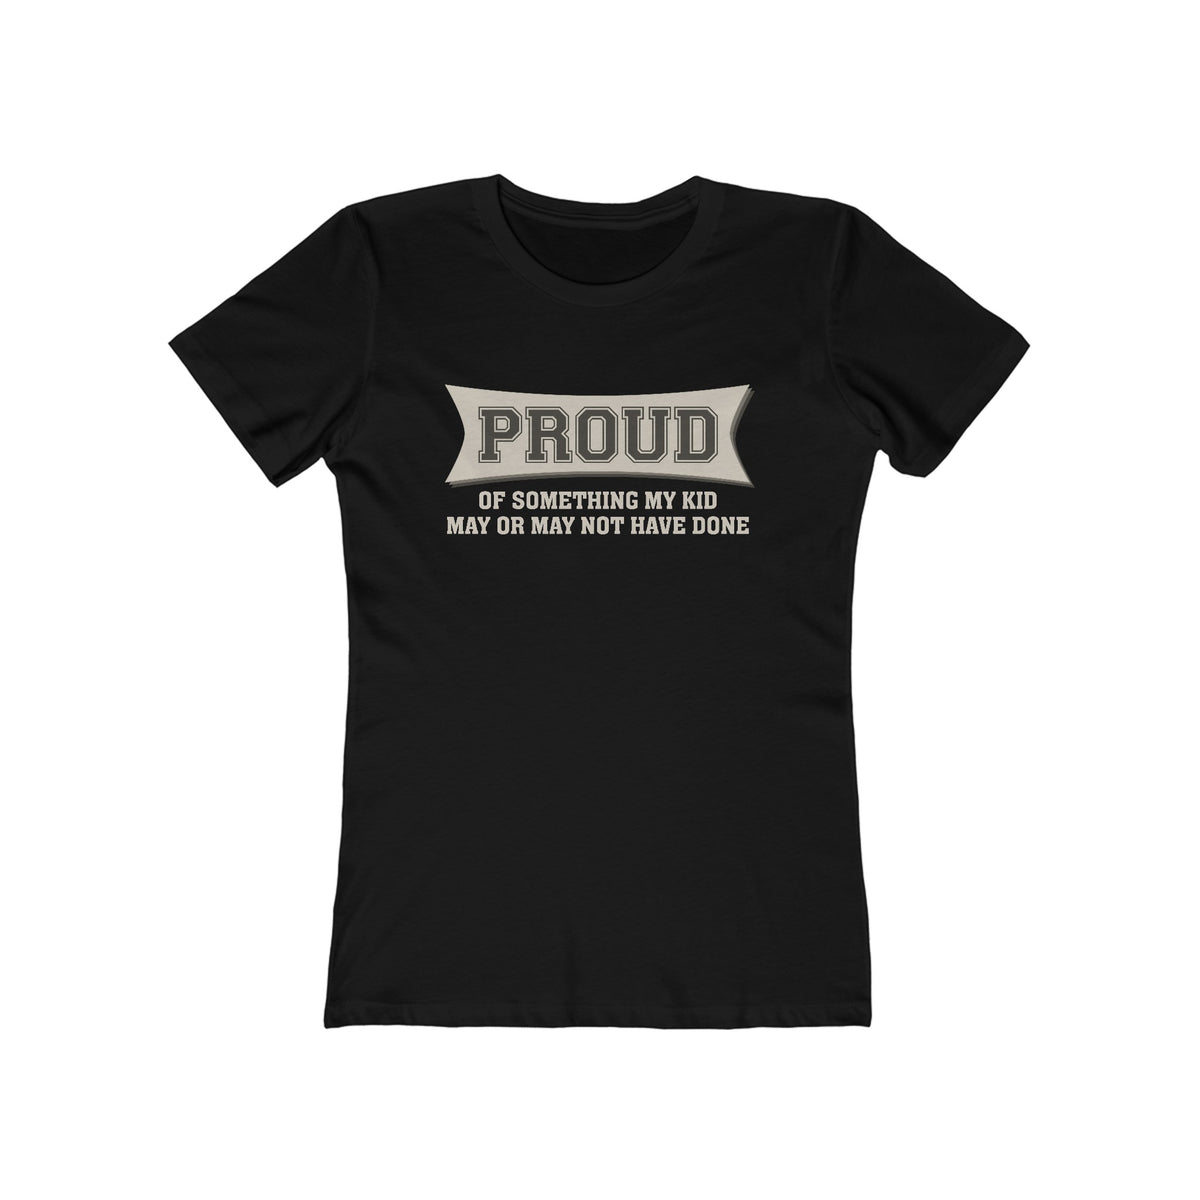 Proud Of Something My Kid May Or May Not Have Done - Women’s T-Shirt